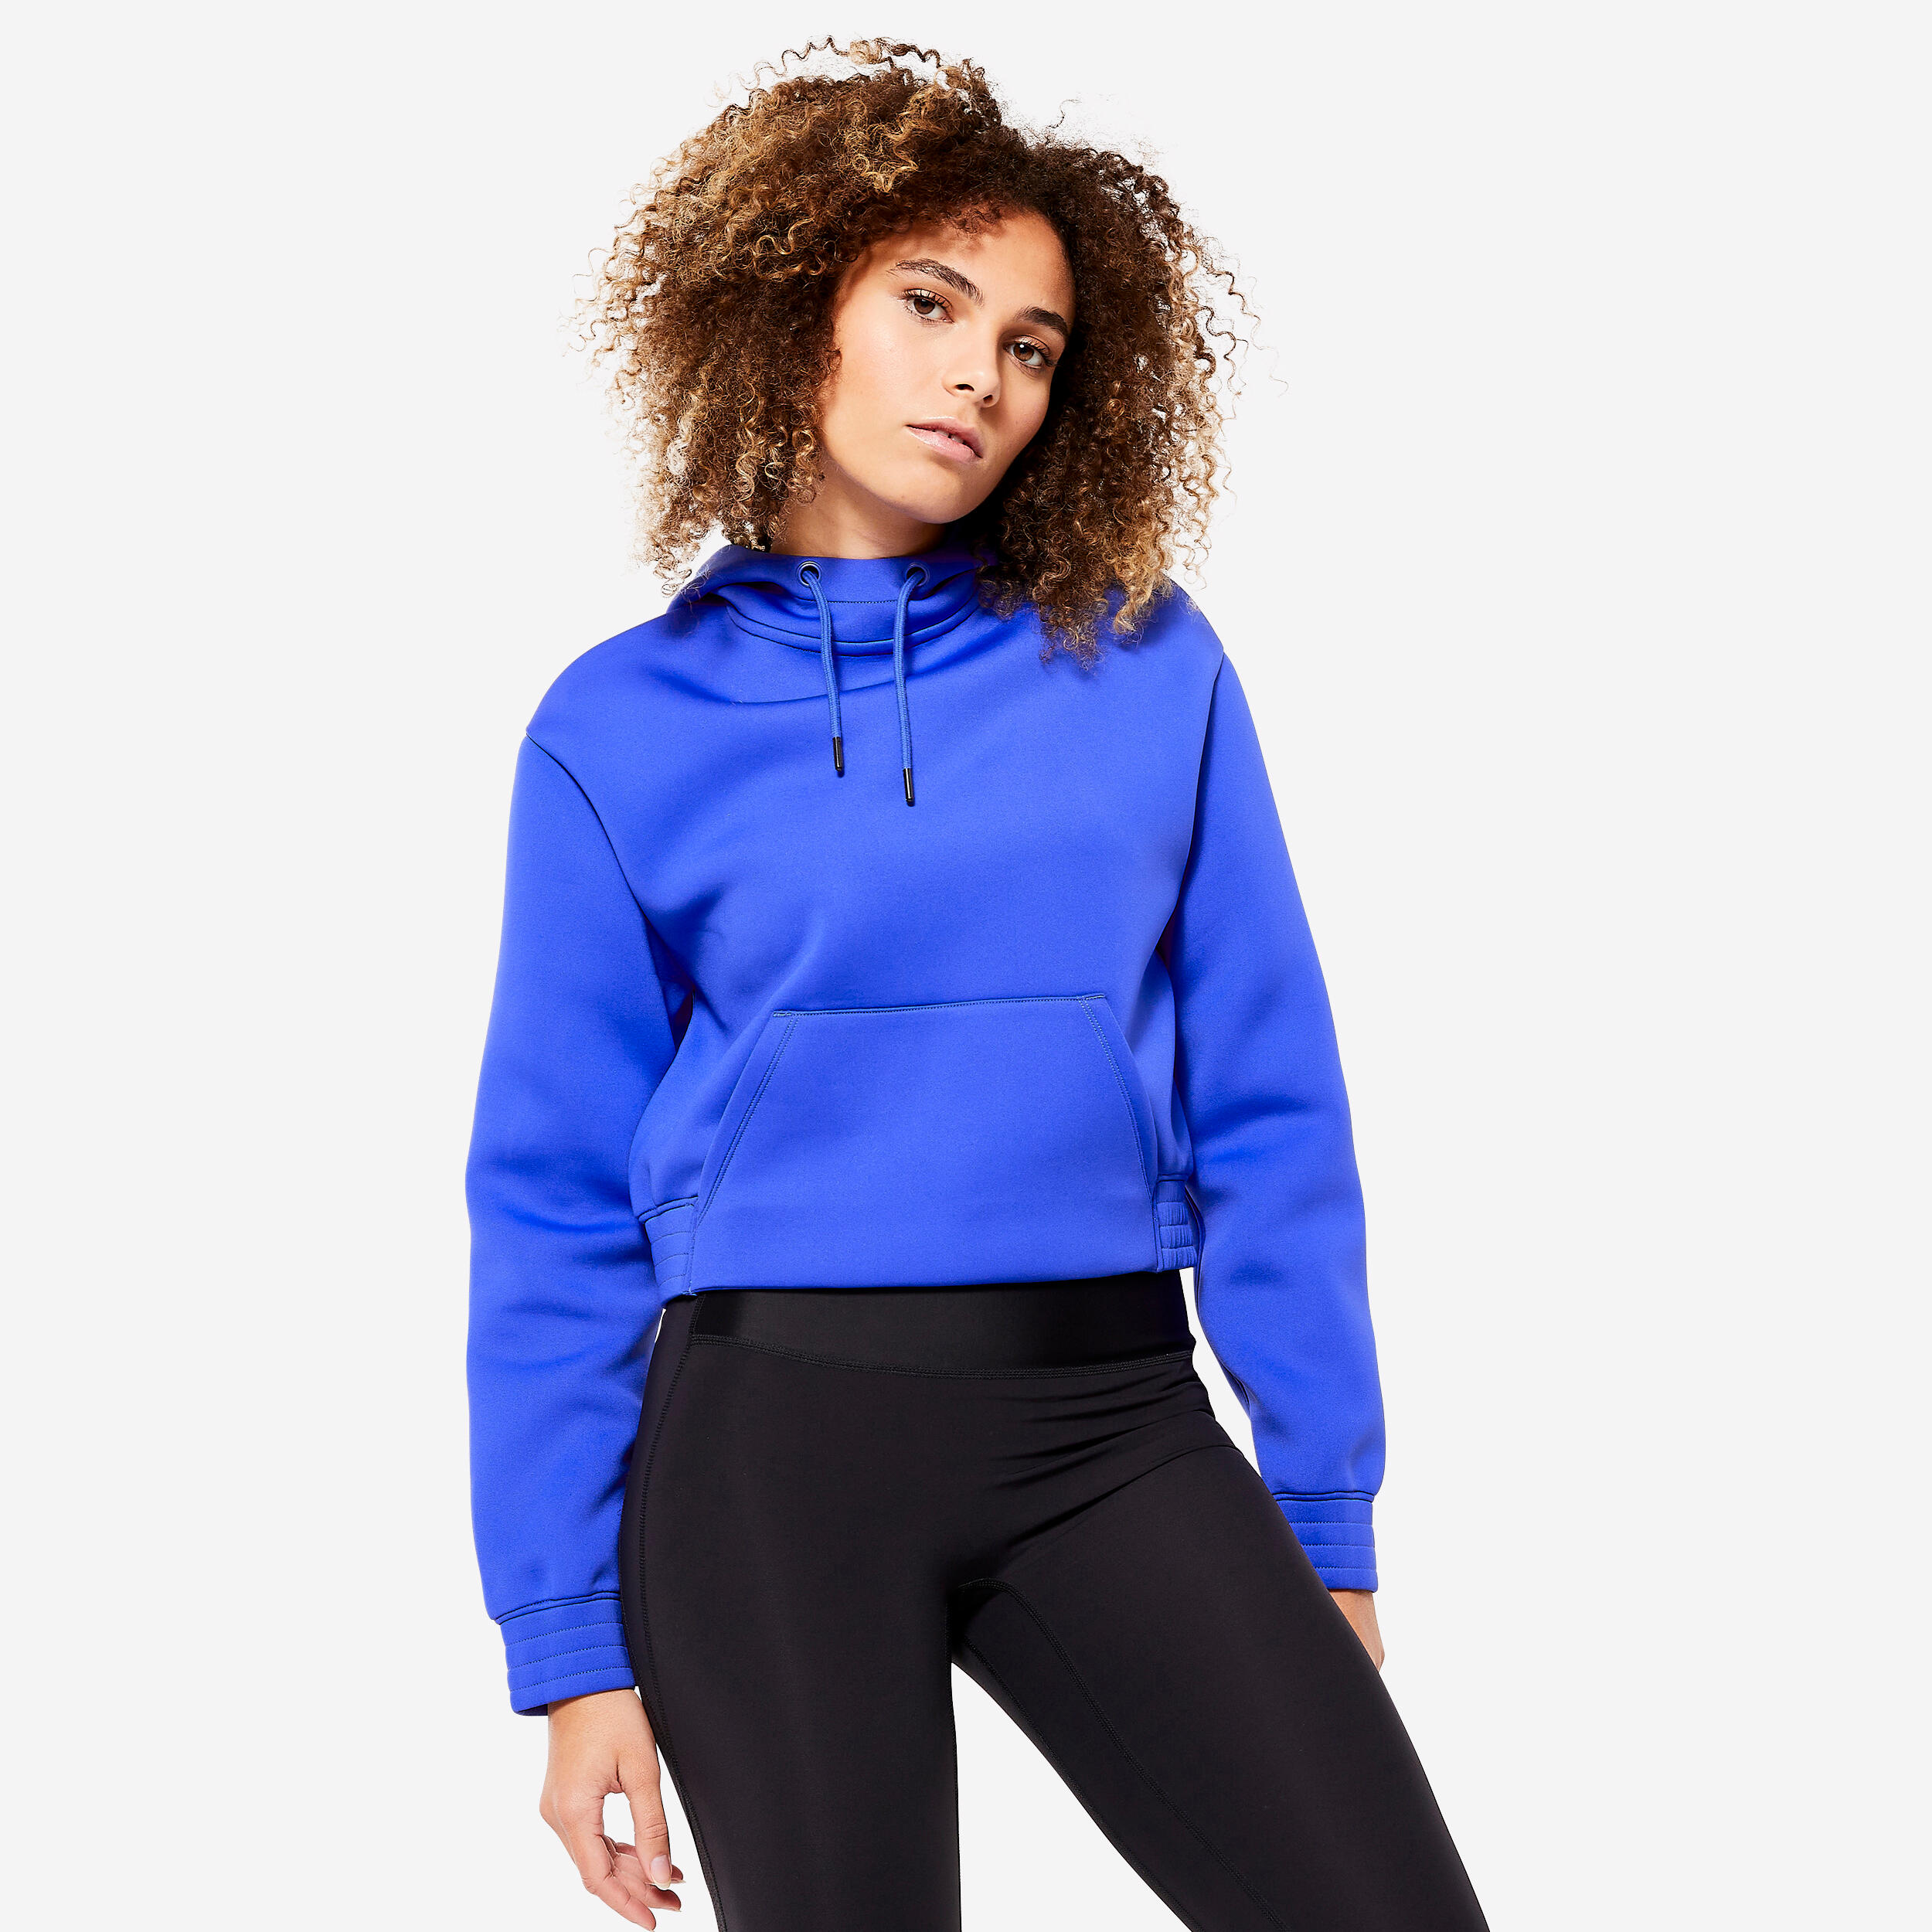 Gaiam Women's Pullover Fleece Yoga Sweatshirt - Long Sleeve Graphic  Activewear Sweater - Medieval Blue, X-Large : Buy Online at Best Price in  KSA - Souq is now : Fashion